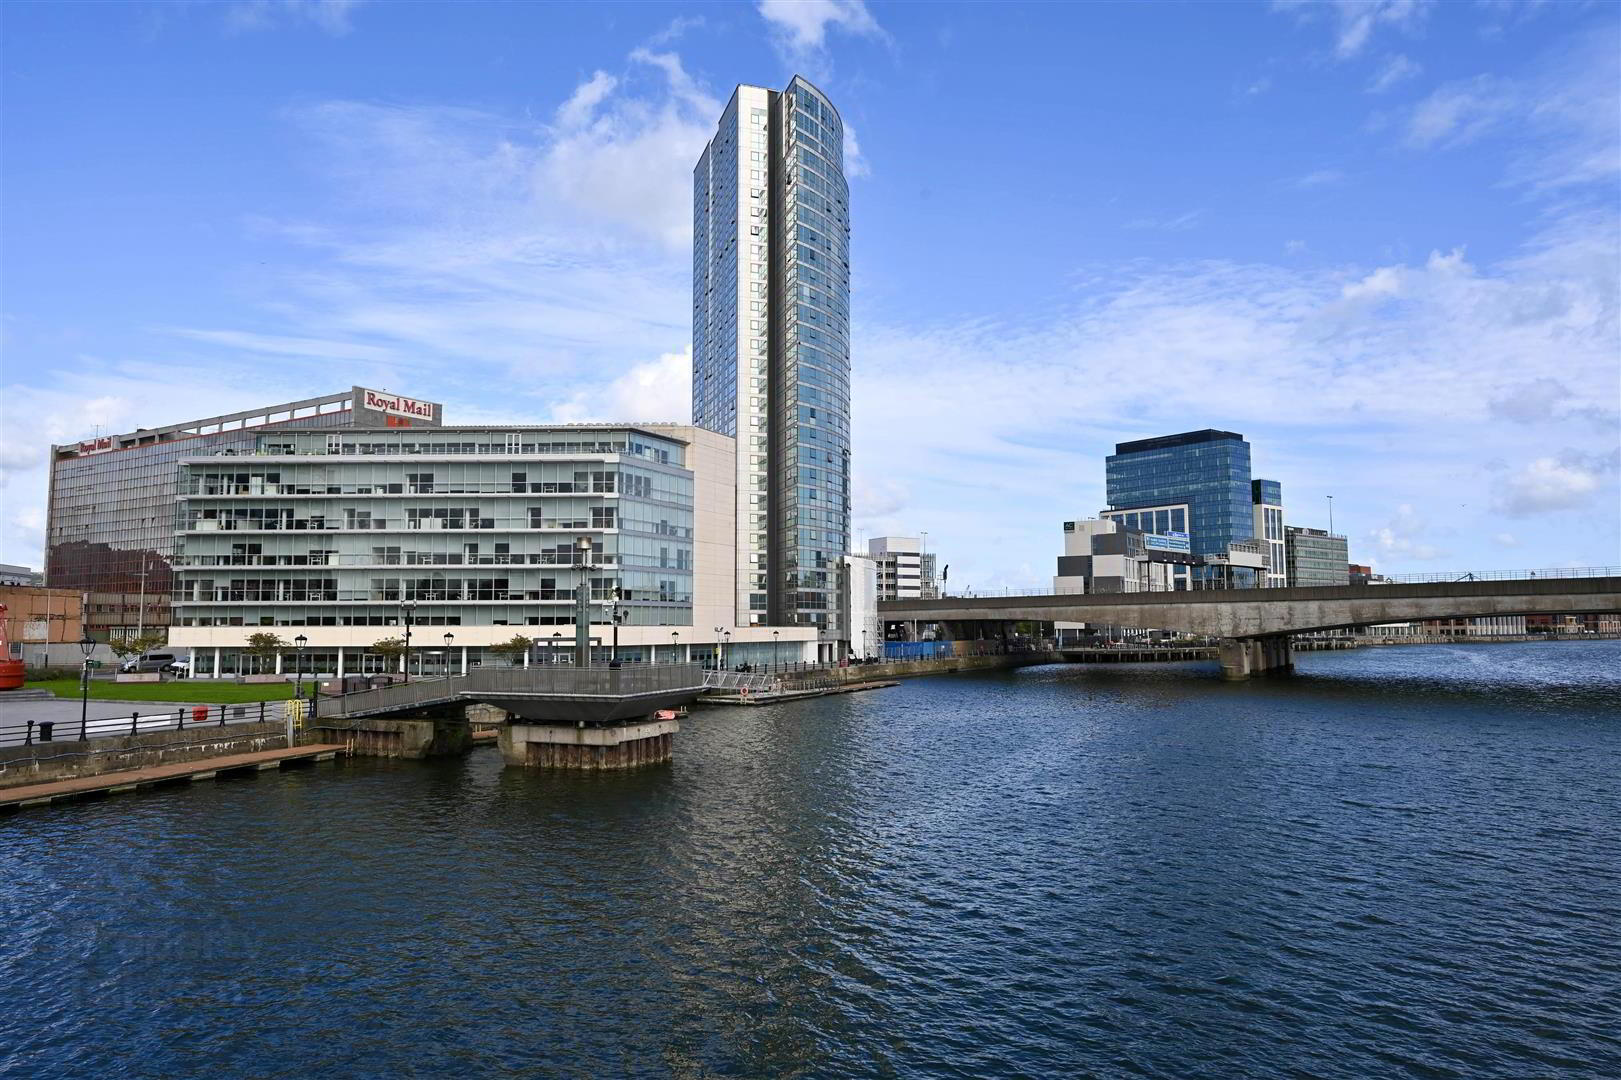 6.05 Obel Tower, 62 Donegall Quay